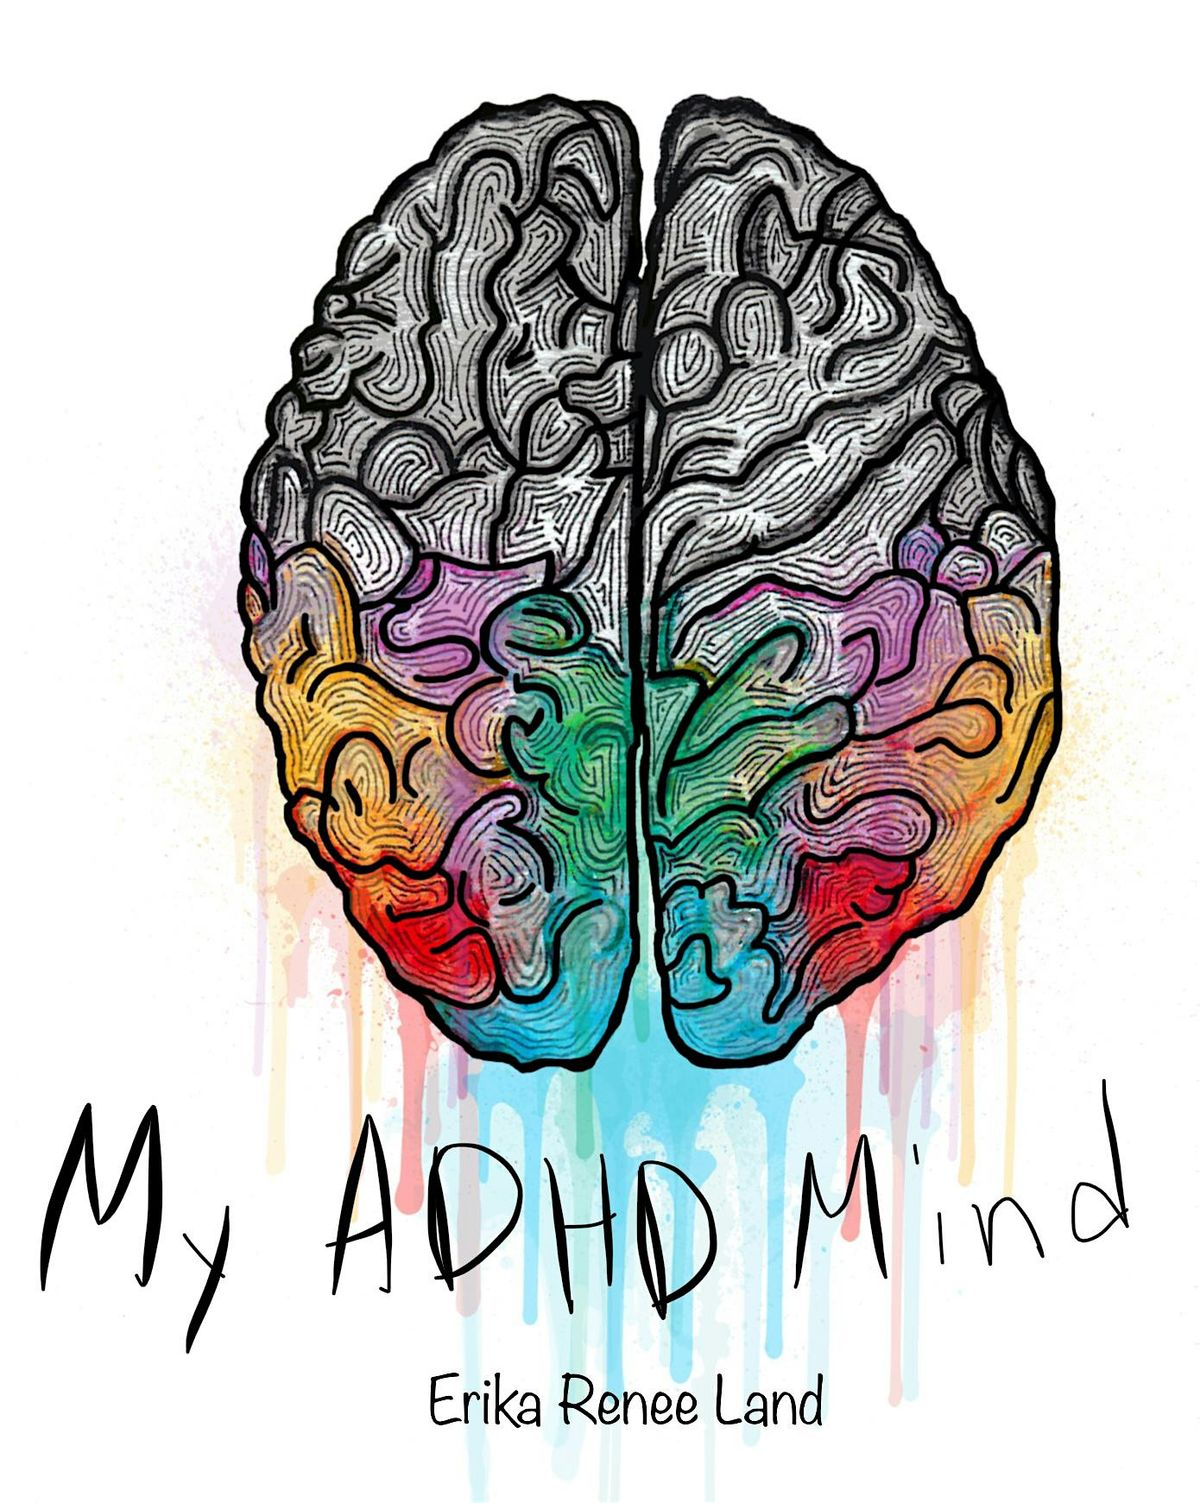 Seeing ADHD